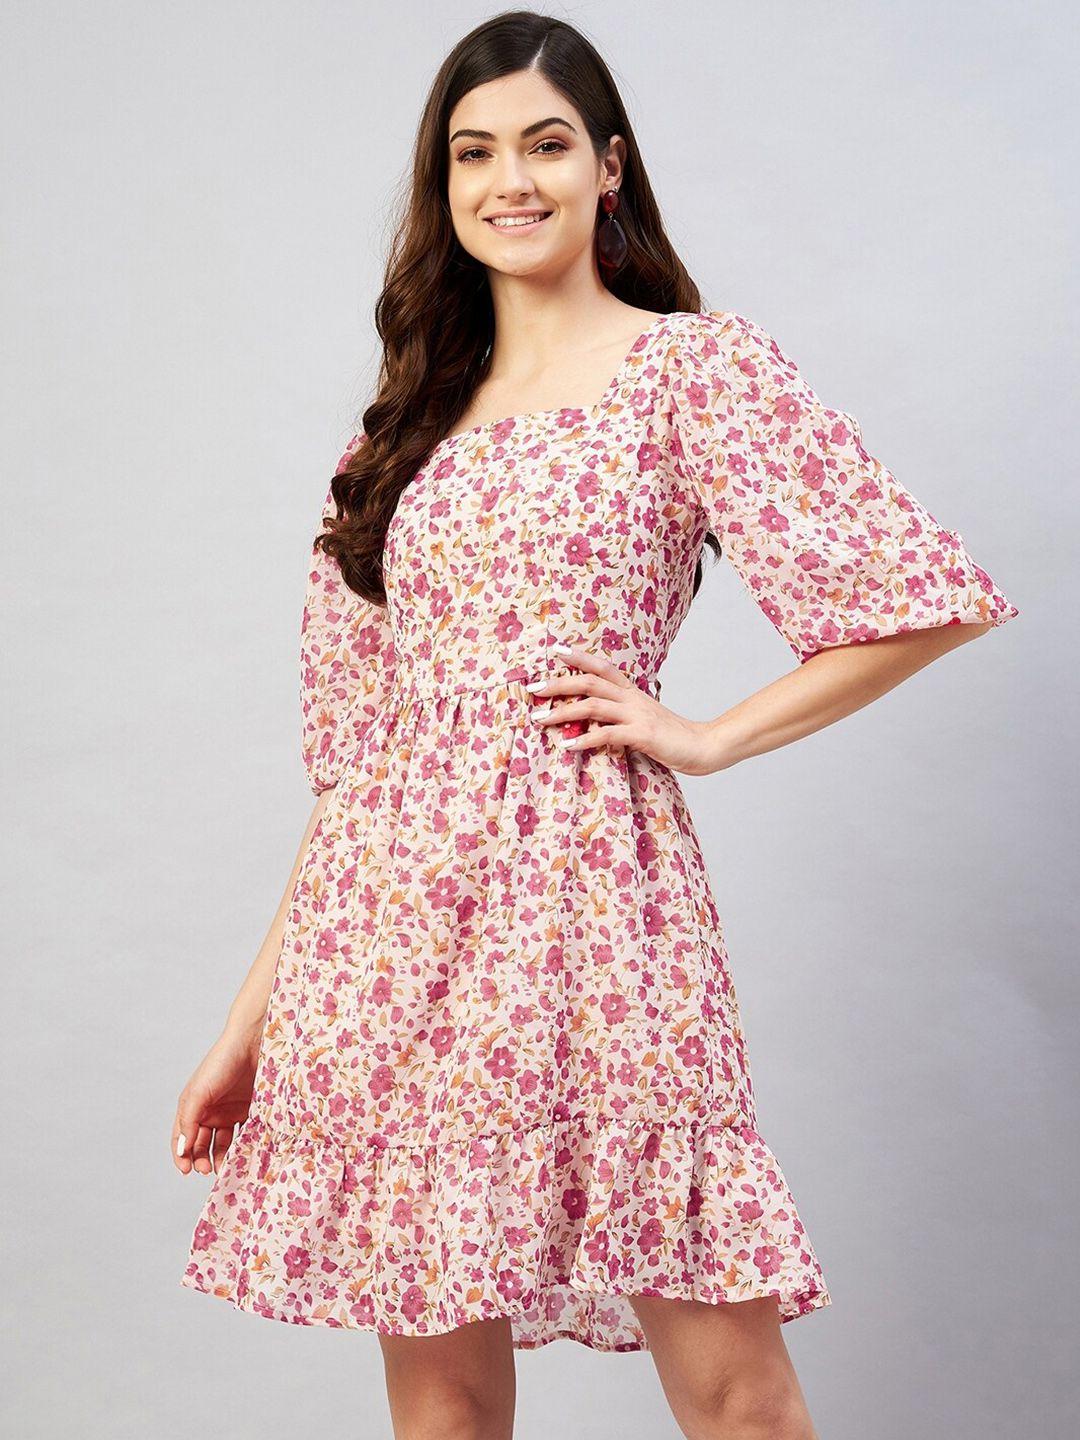 marie-claire-pink-floral-georgette-dress